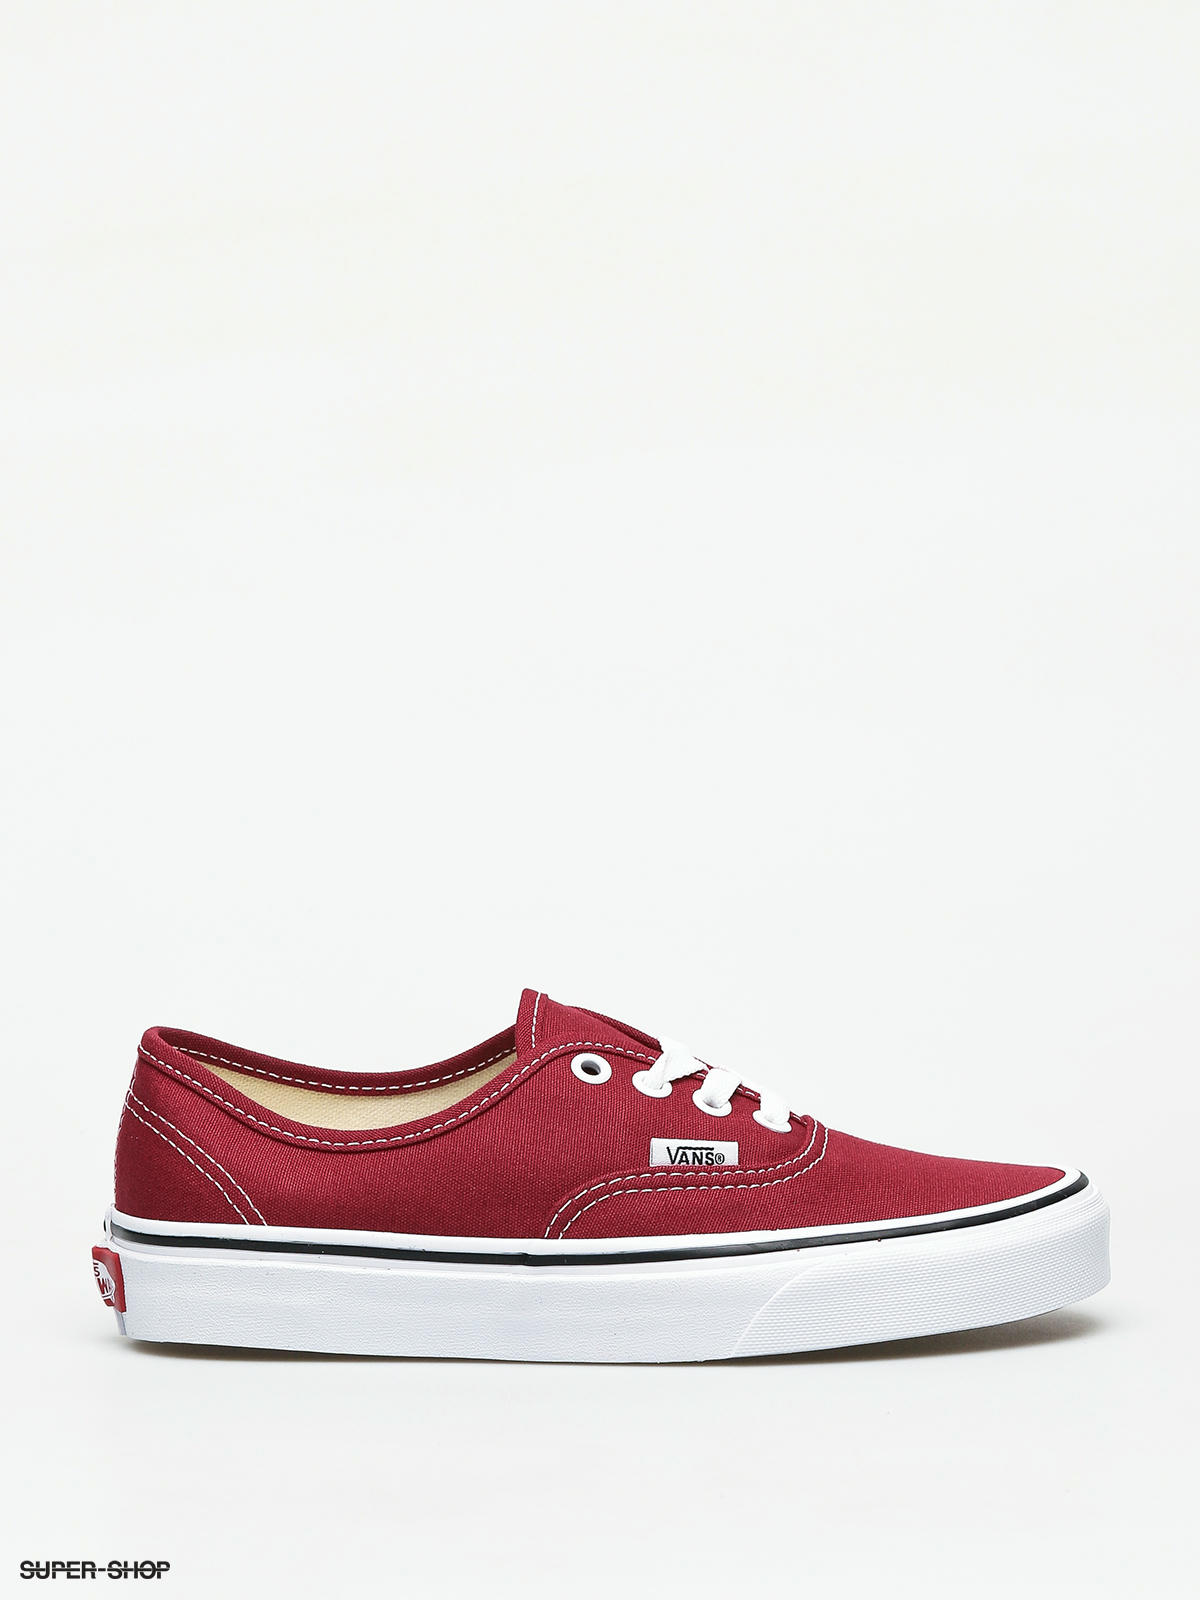 Vans Authentic Shoes (rumba red/true white)